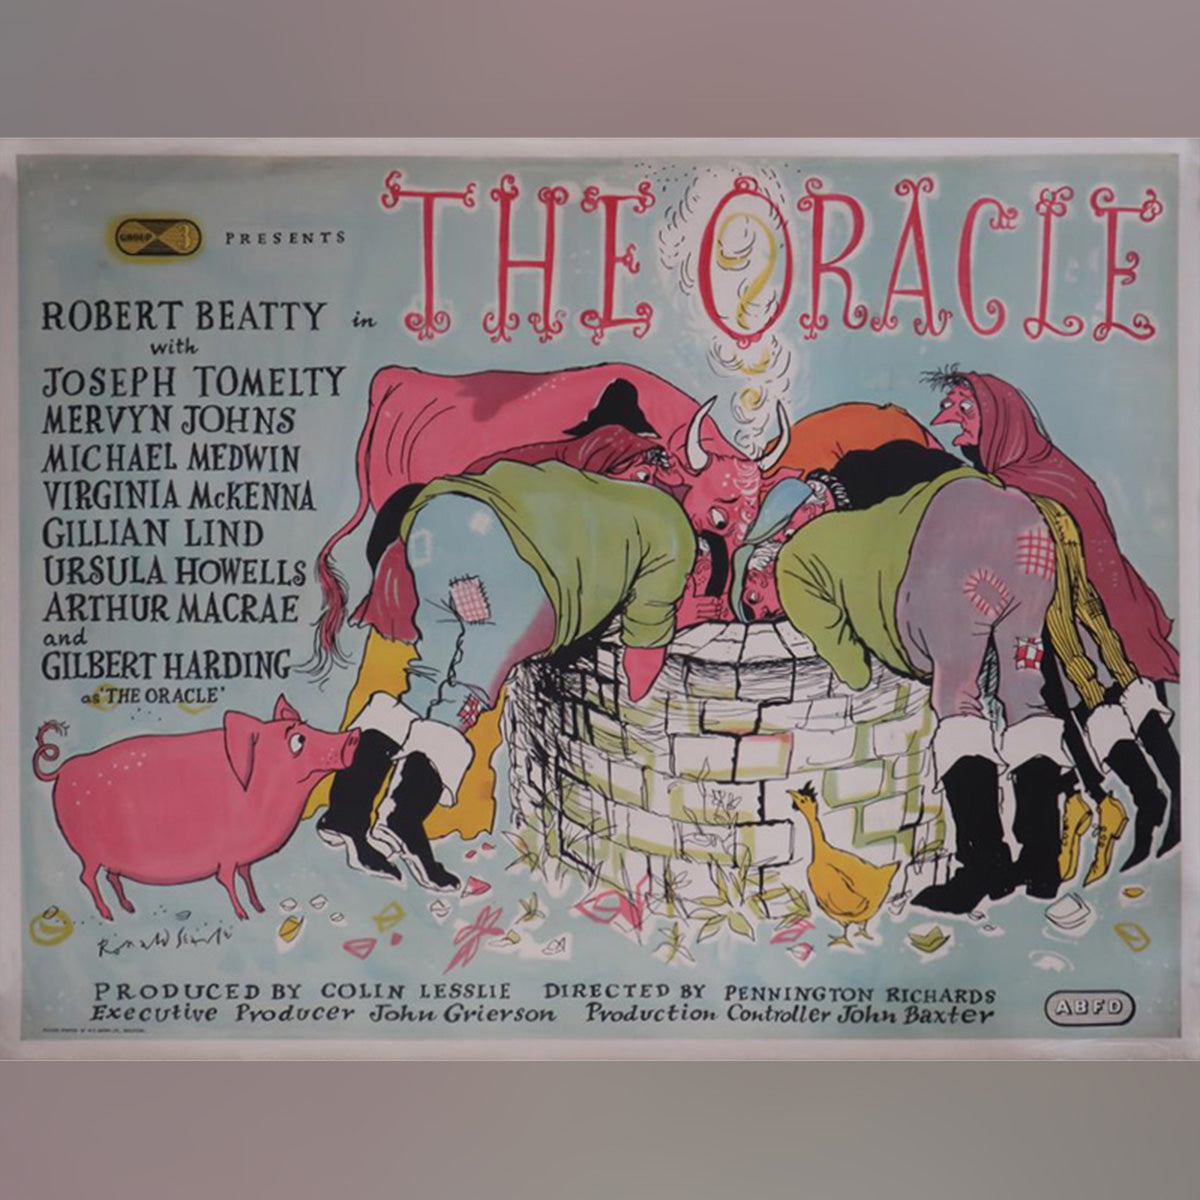 Original Movie Poster of Oracle, The (1953)